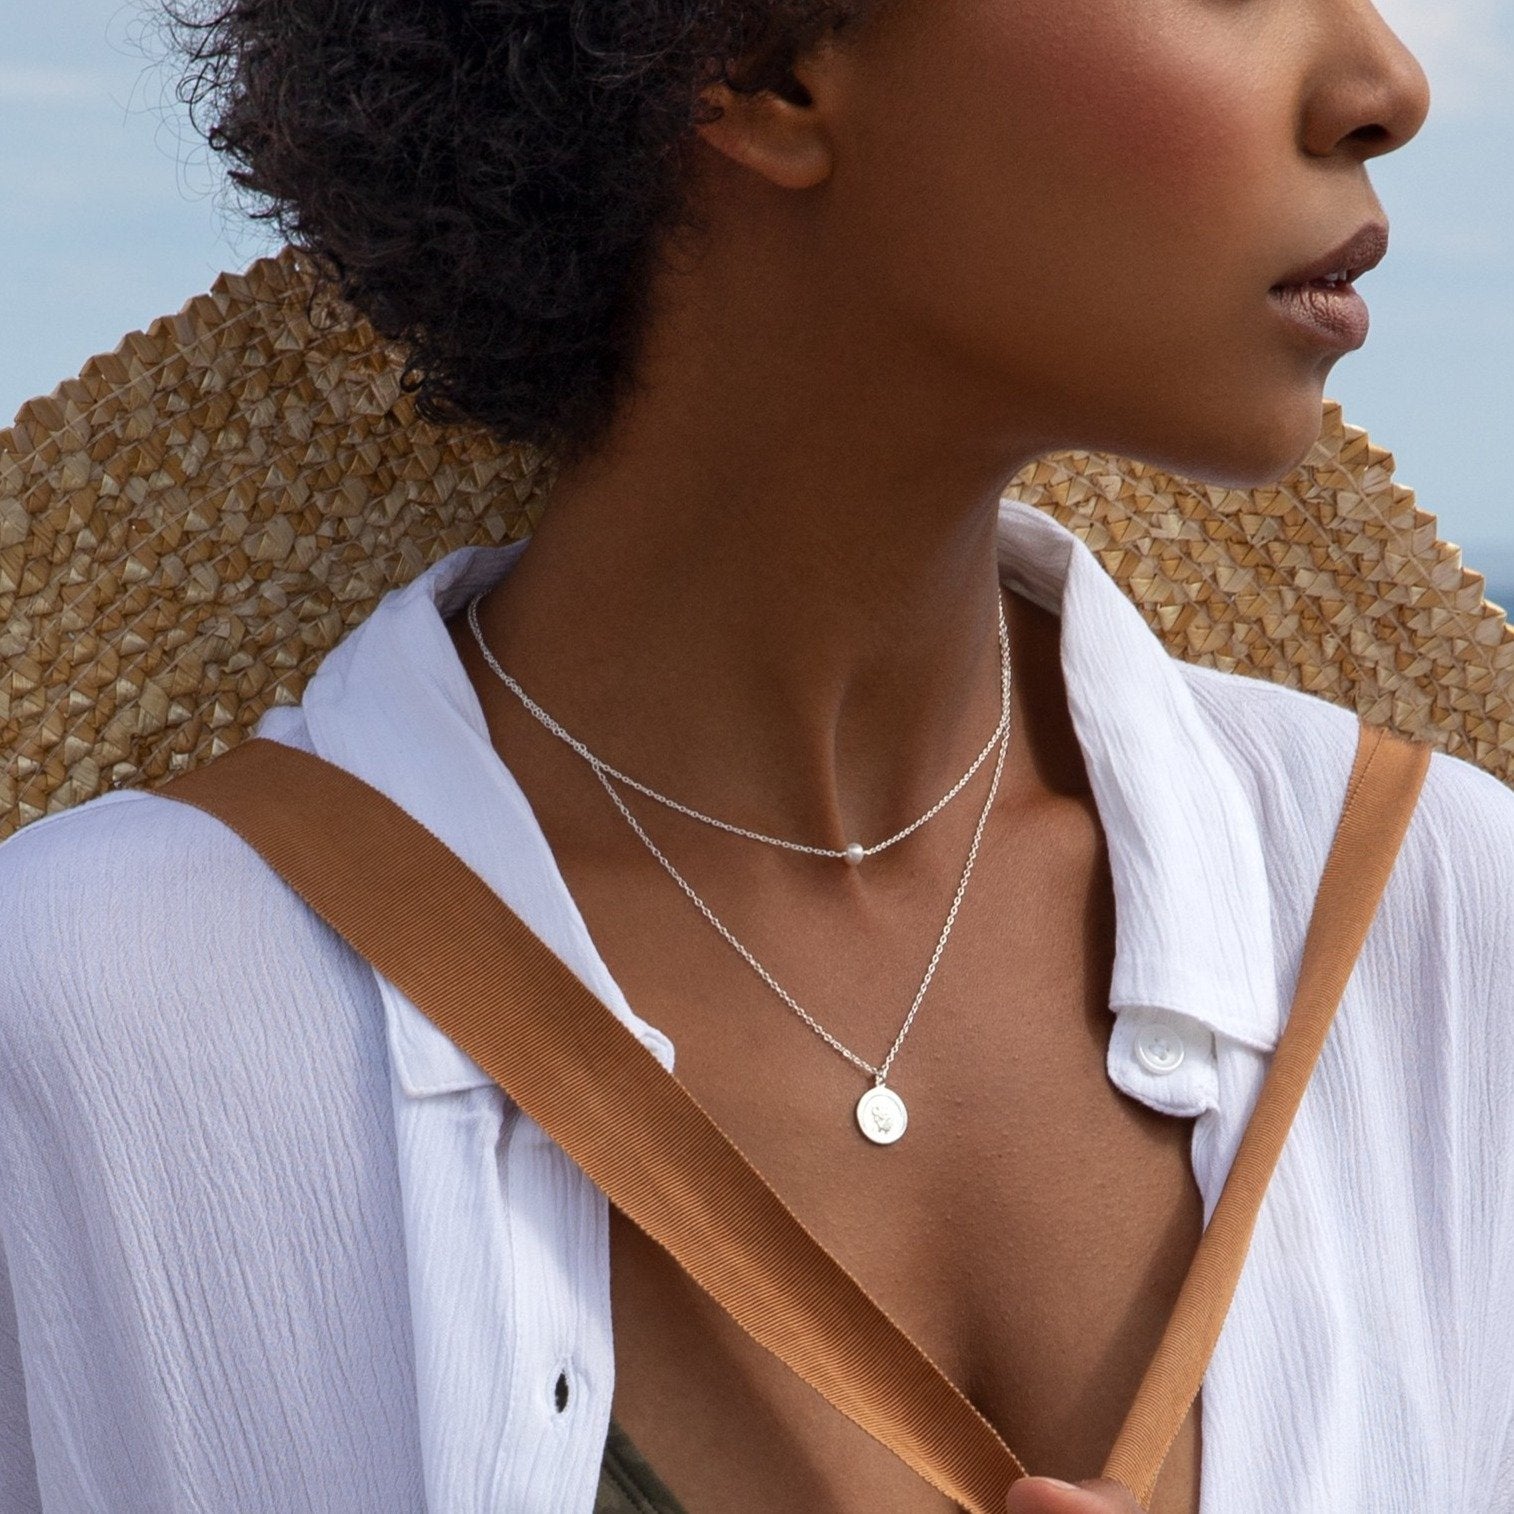 Woman in a white shirt wearing a silver single pearl choker layered with a silver symbol necklace around her neck